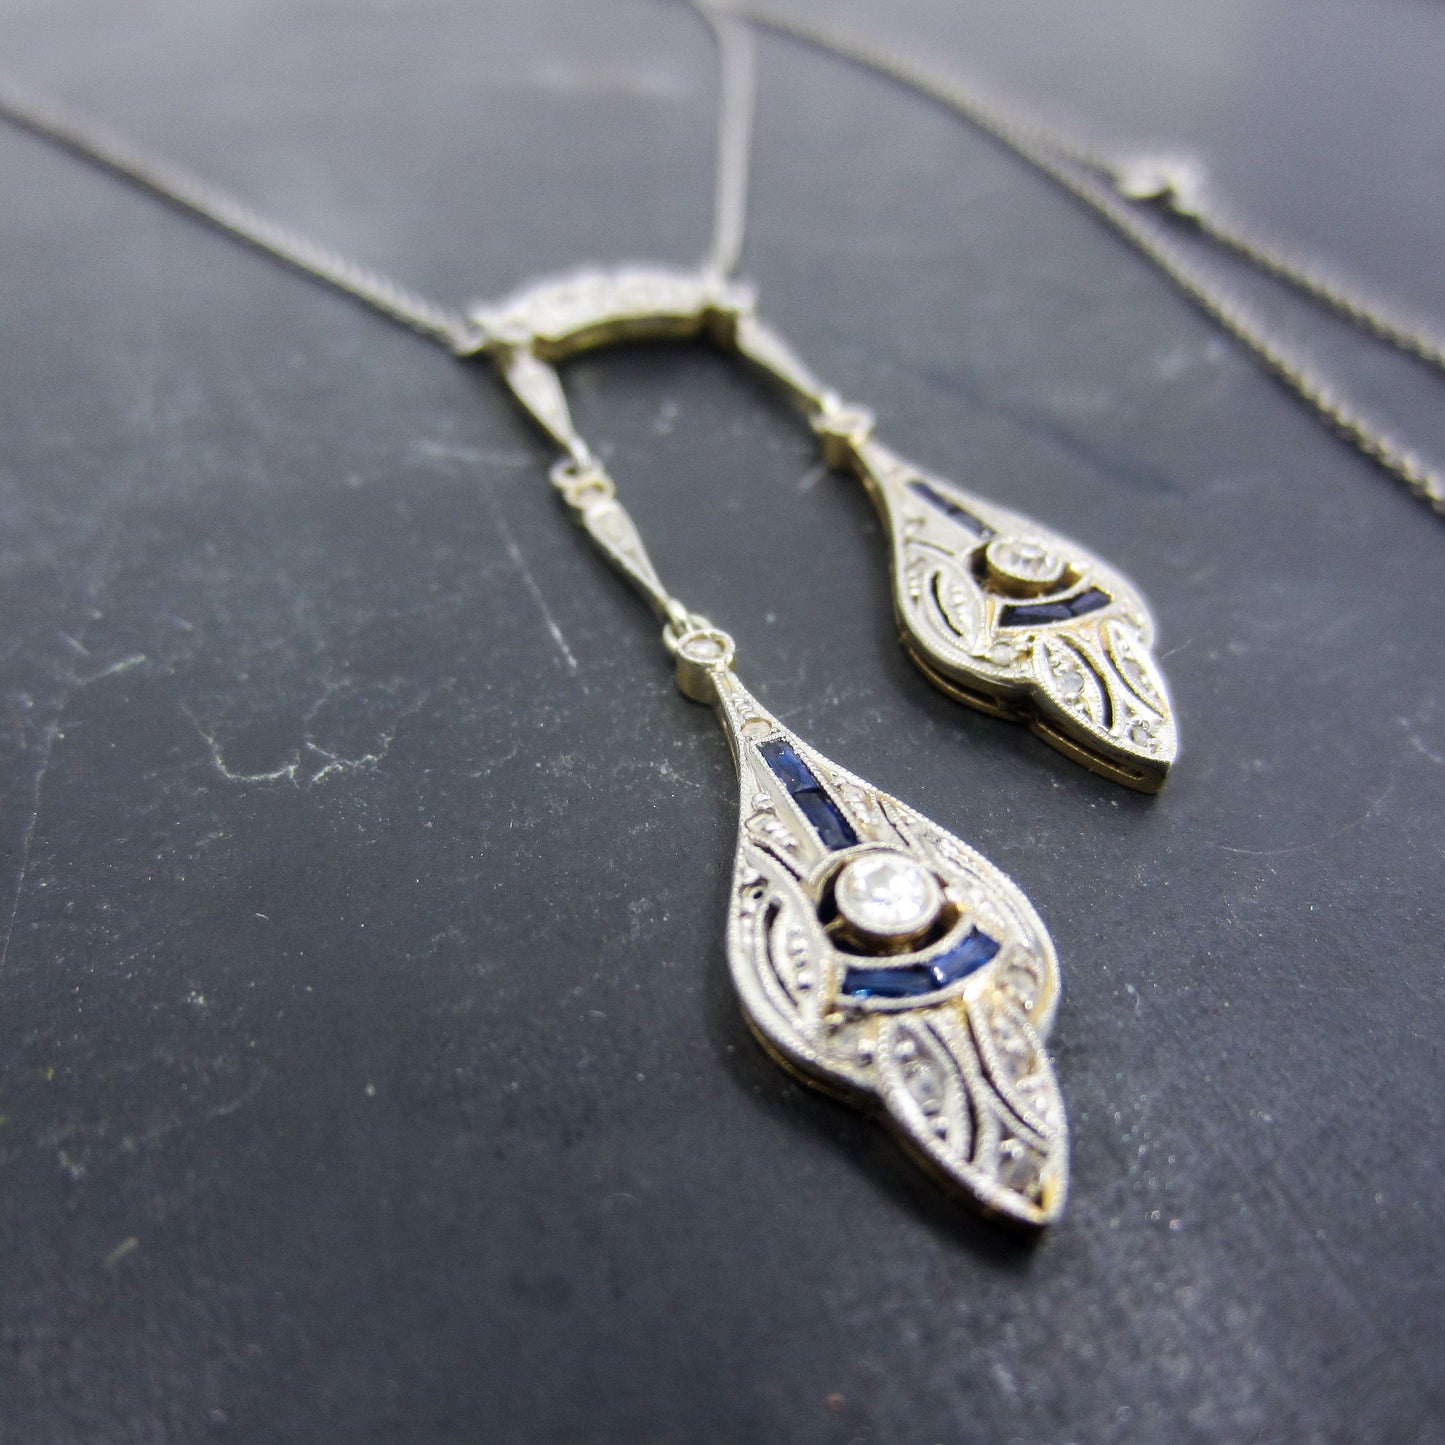 SOLD-Art Deco Diamond and Sapphire Negligee Necklace Plat/14k c. 1930